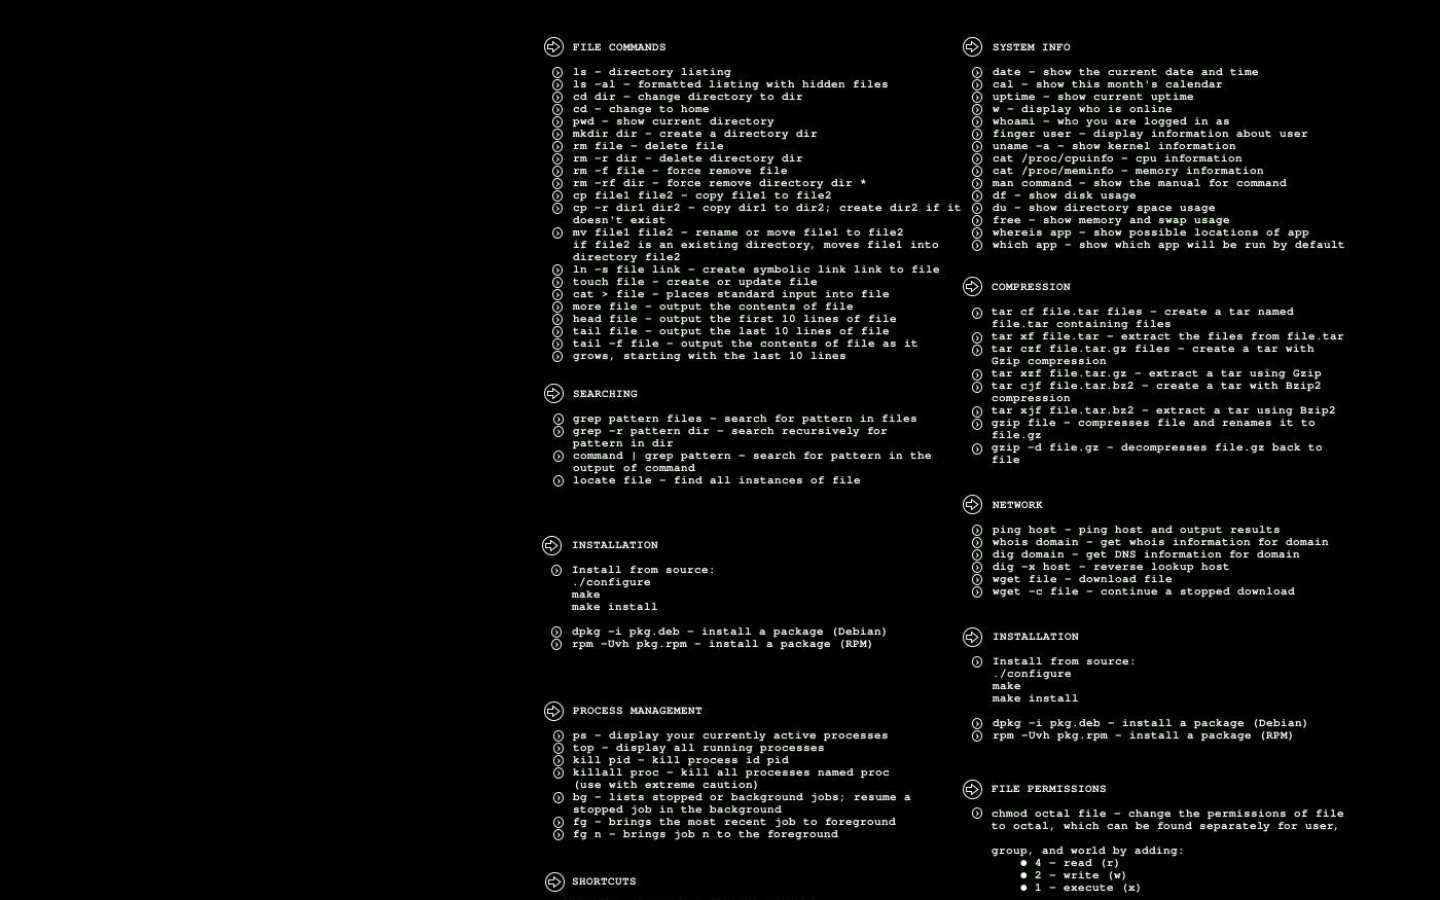 Download Linux Wallpapers That are Also Cheat Sheets